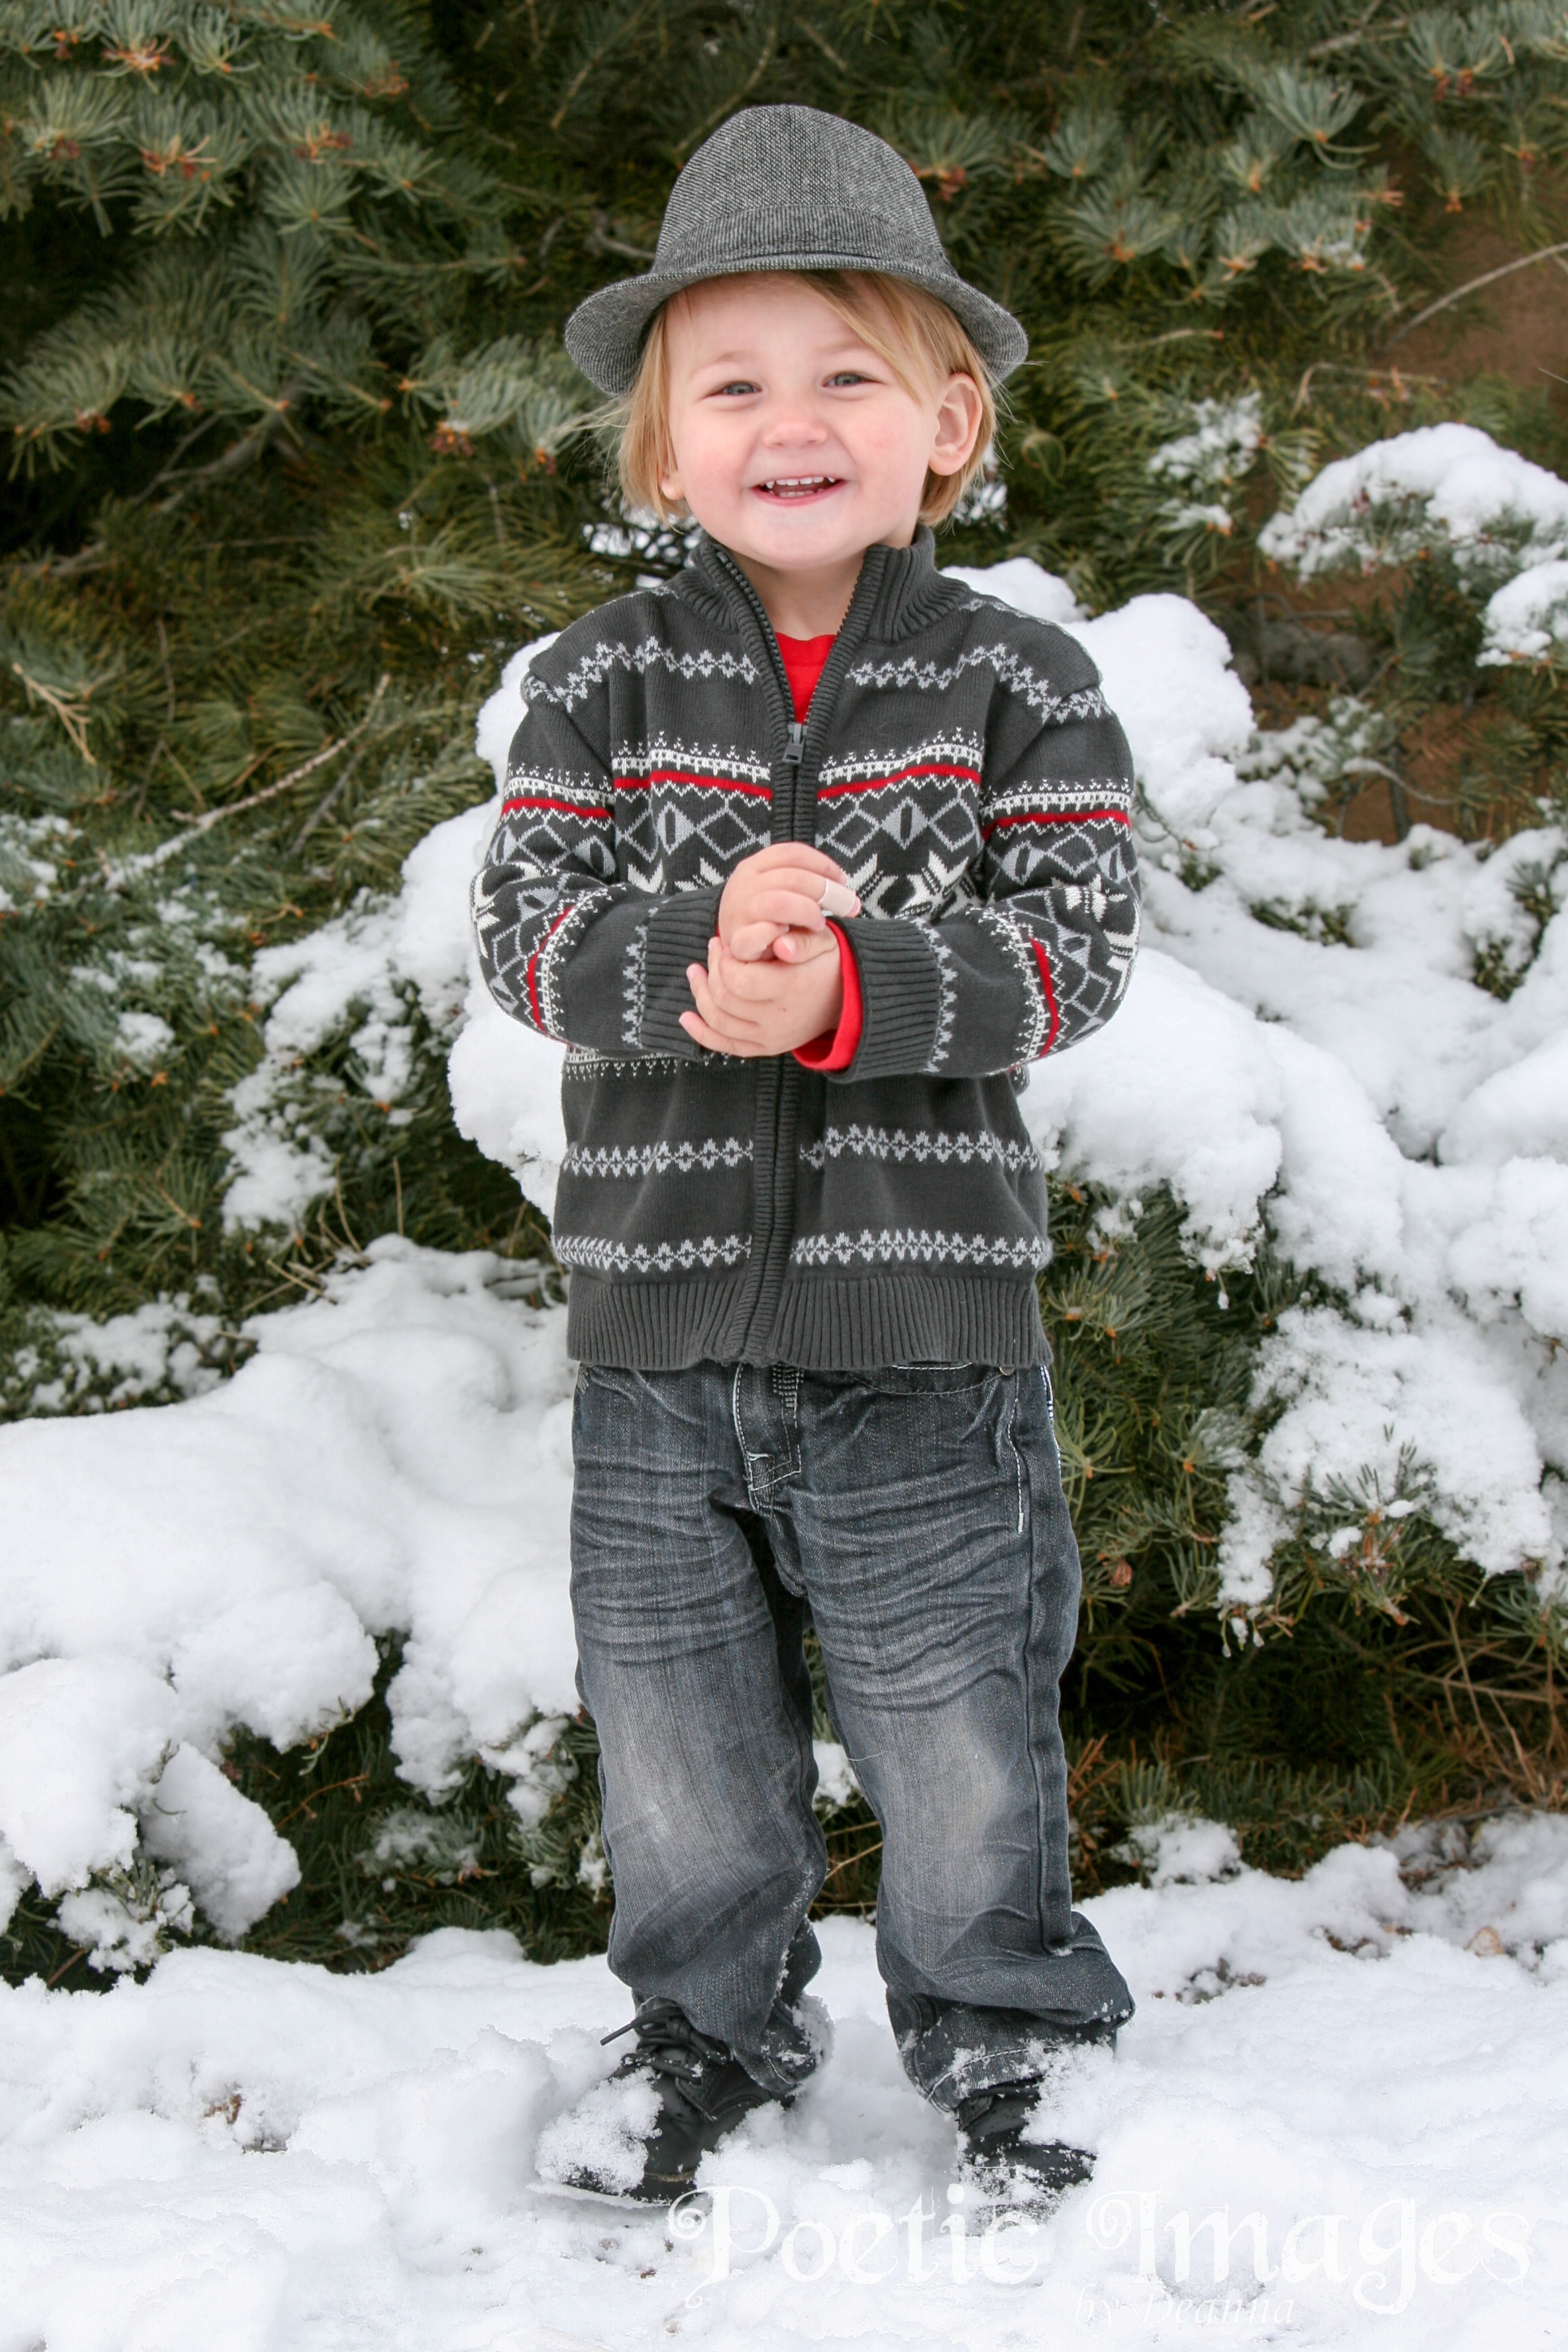 Christmas Photo Sessions for Kids